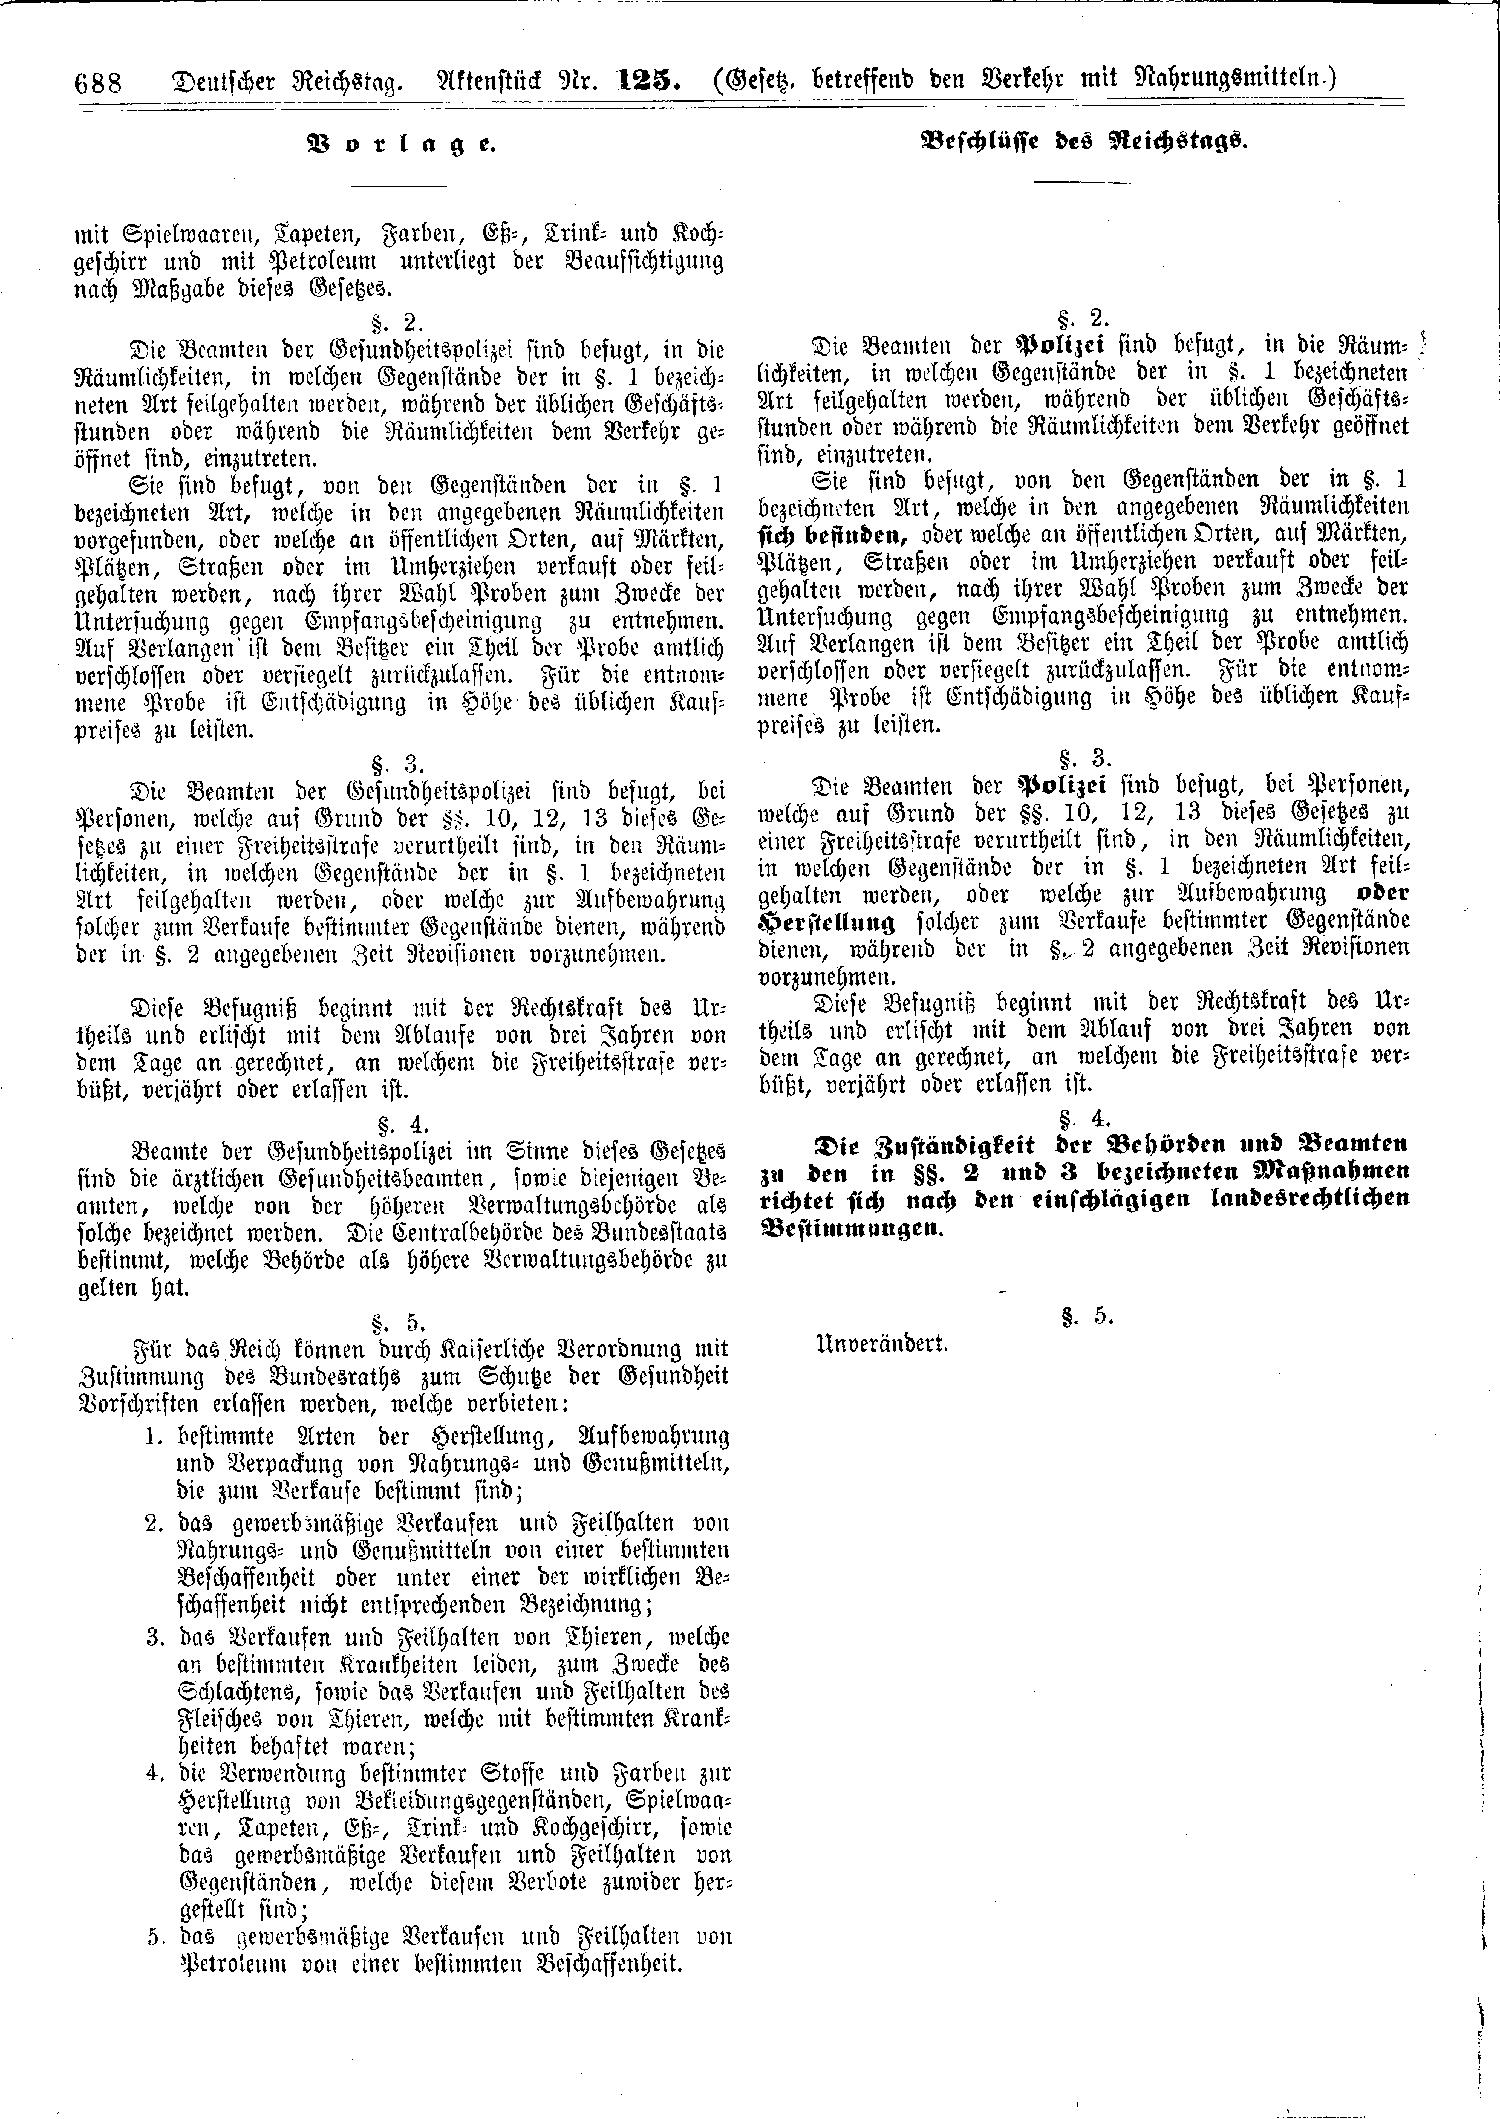 Scan of page 688